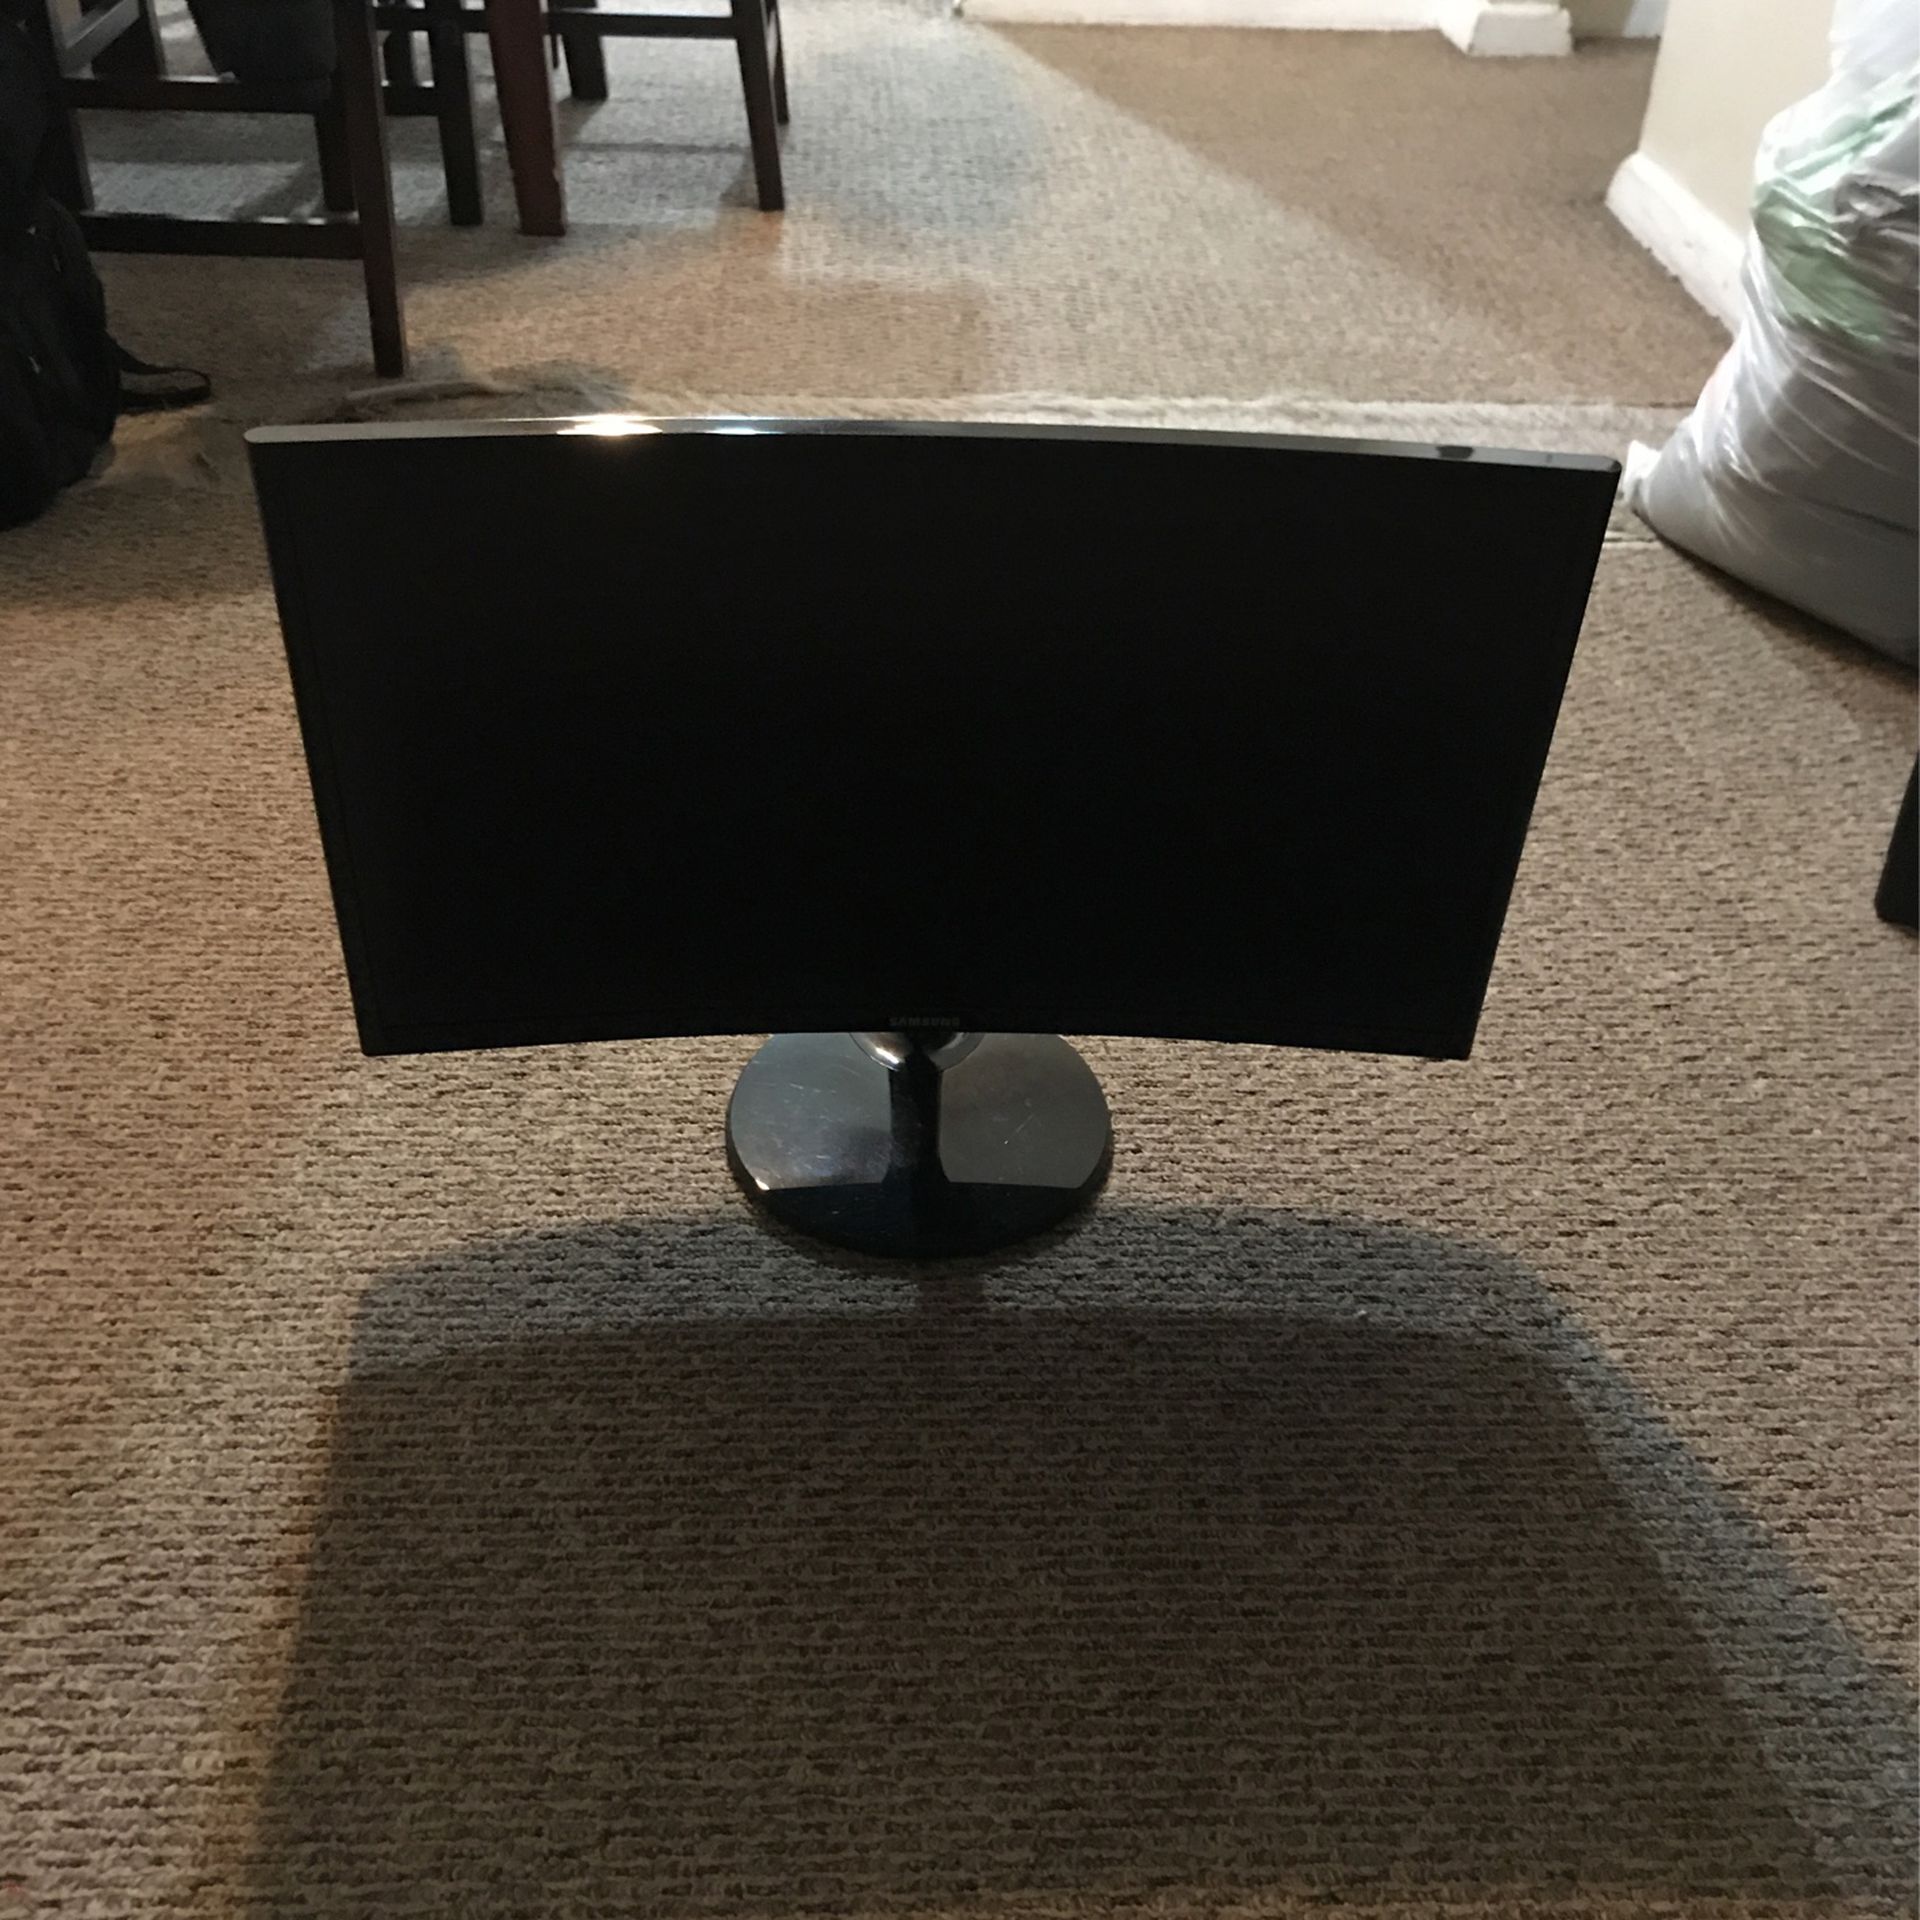 Curved PC Monitor